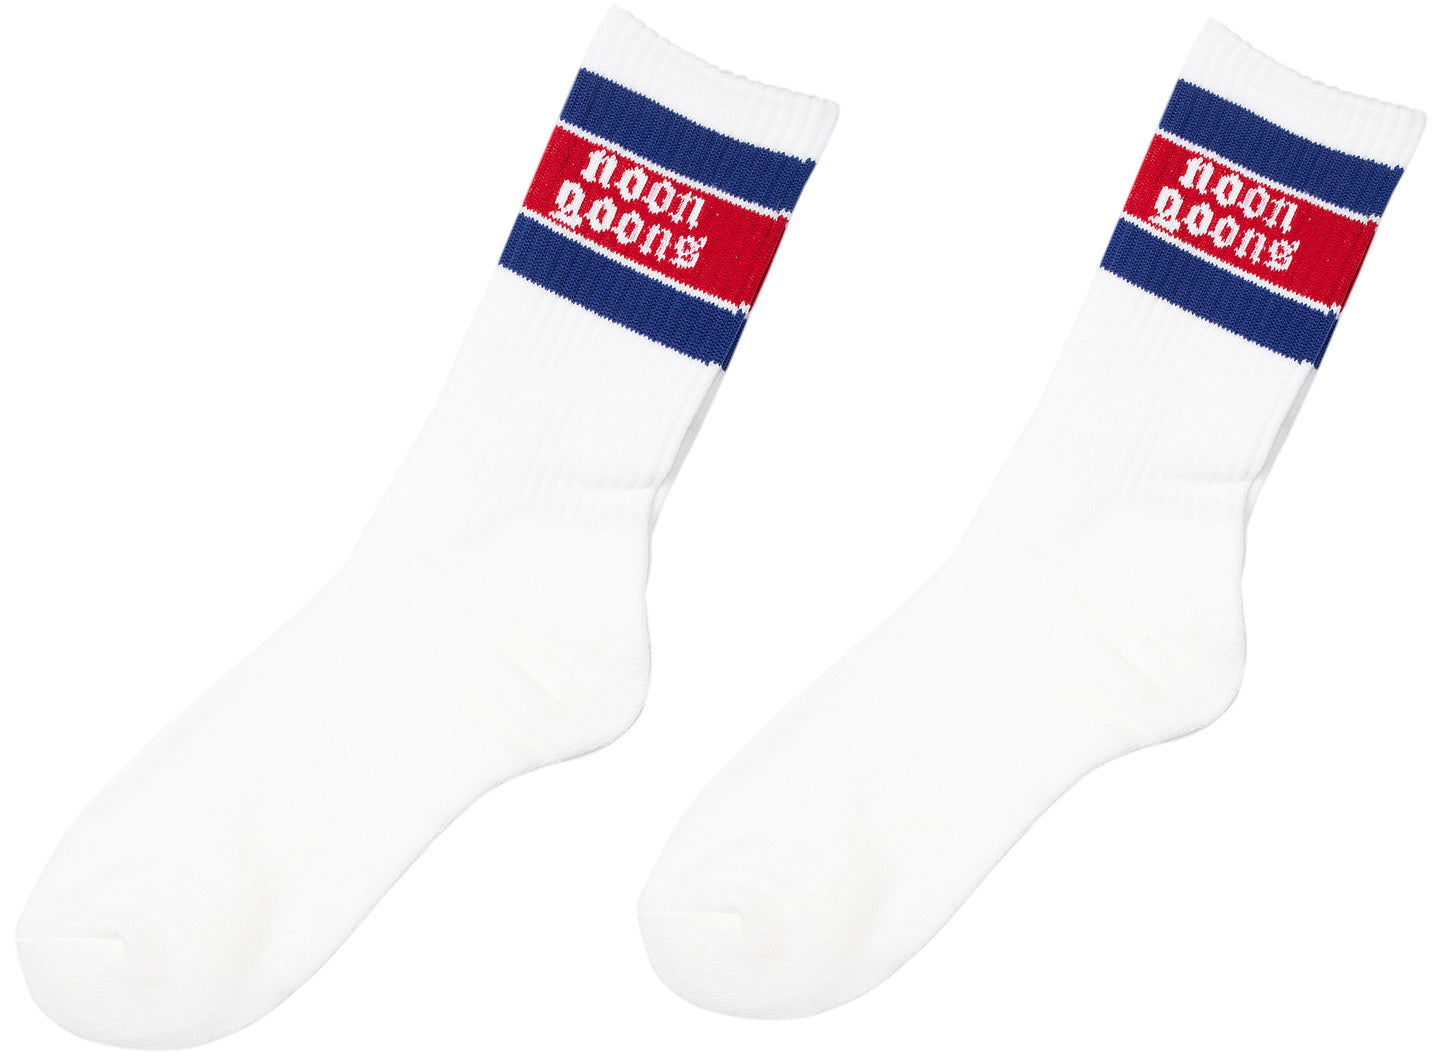 Noon Goons Stop Sox (2 Pack) 'Red/Blue'